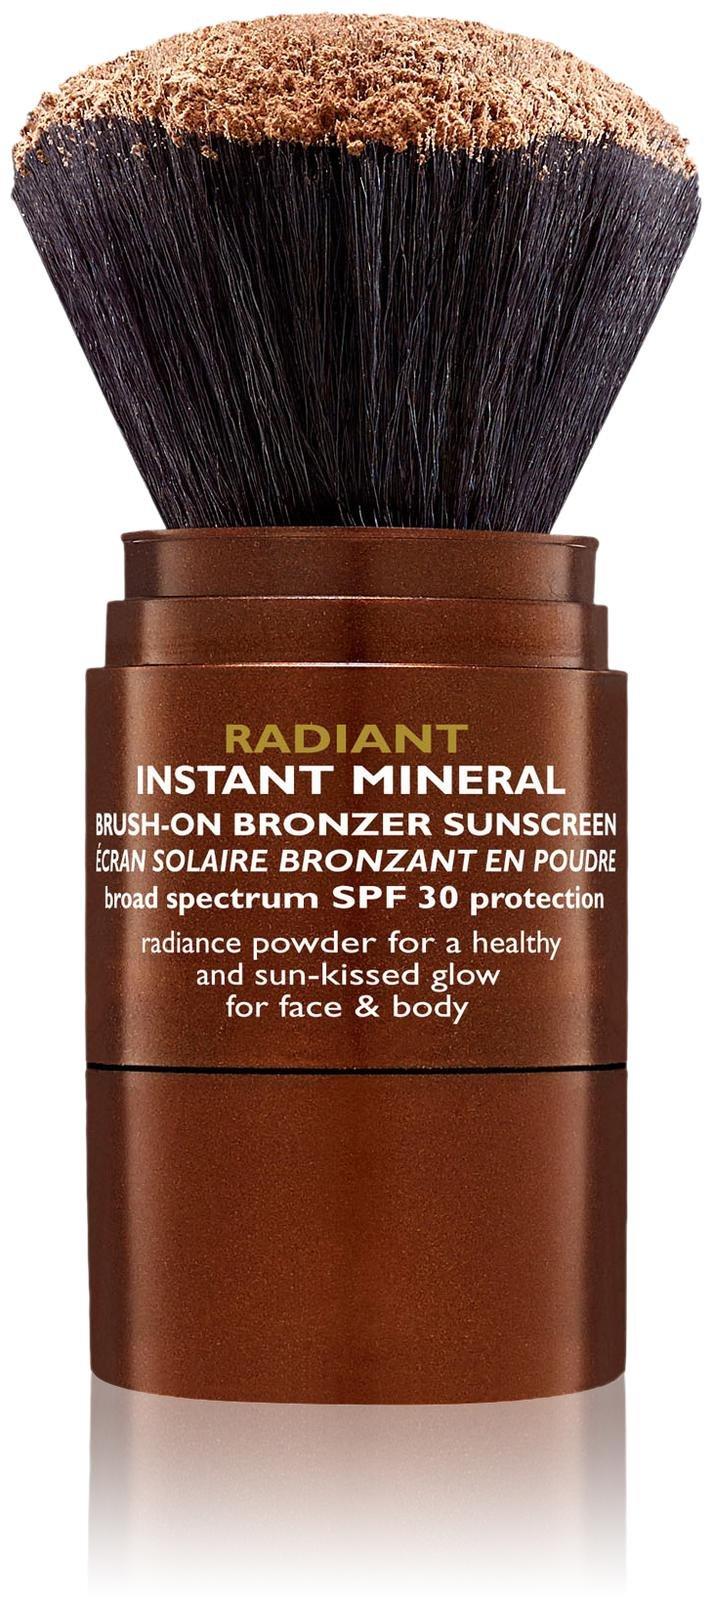 Peter Thomas Roth Radiant Instant Mineral - Spf 30